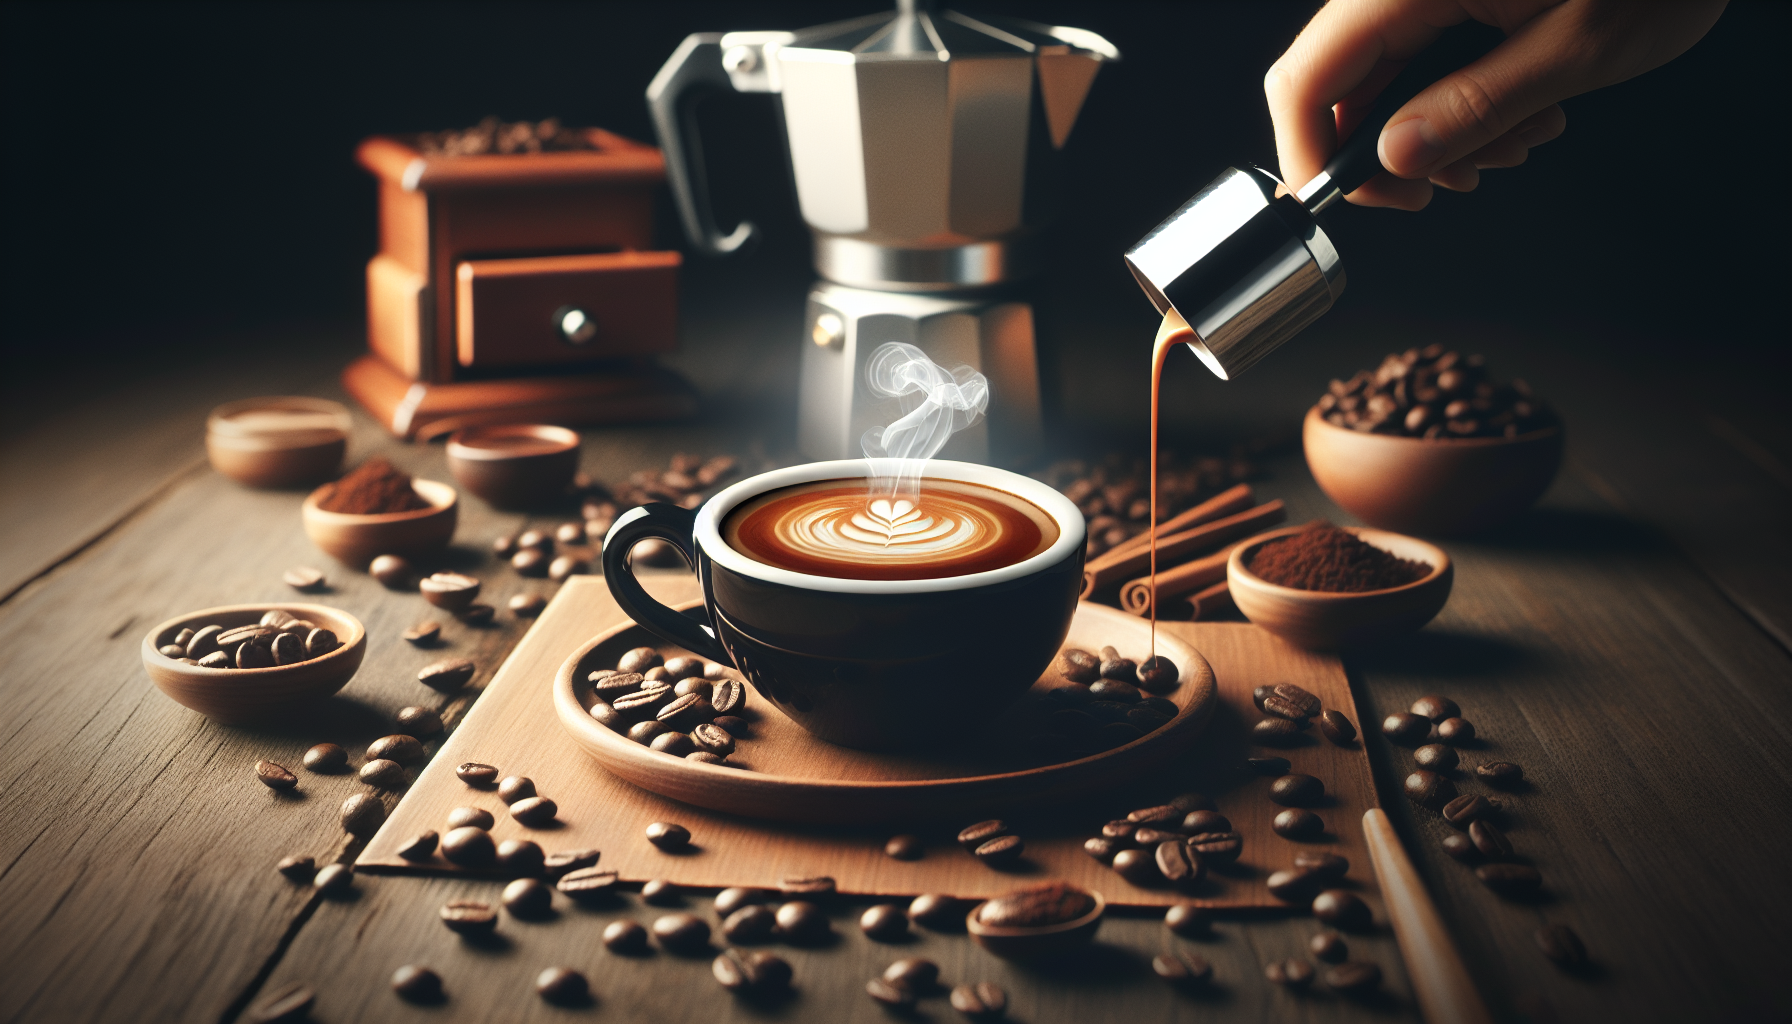 Is Nespresso Coffee Really Better?